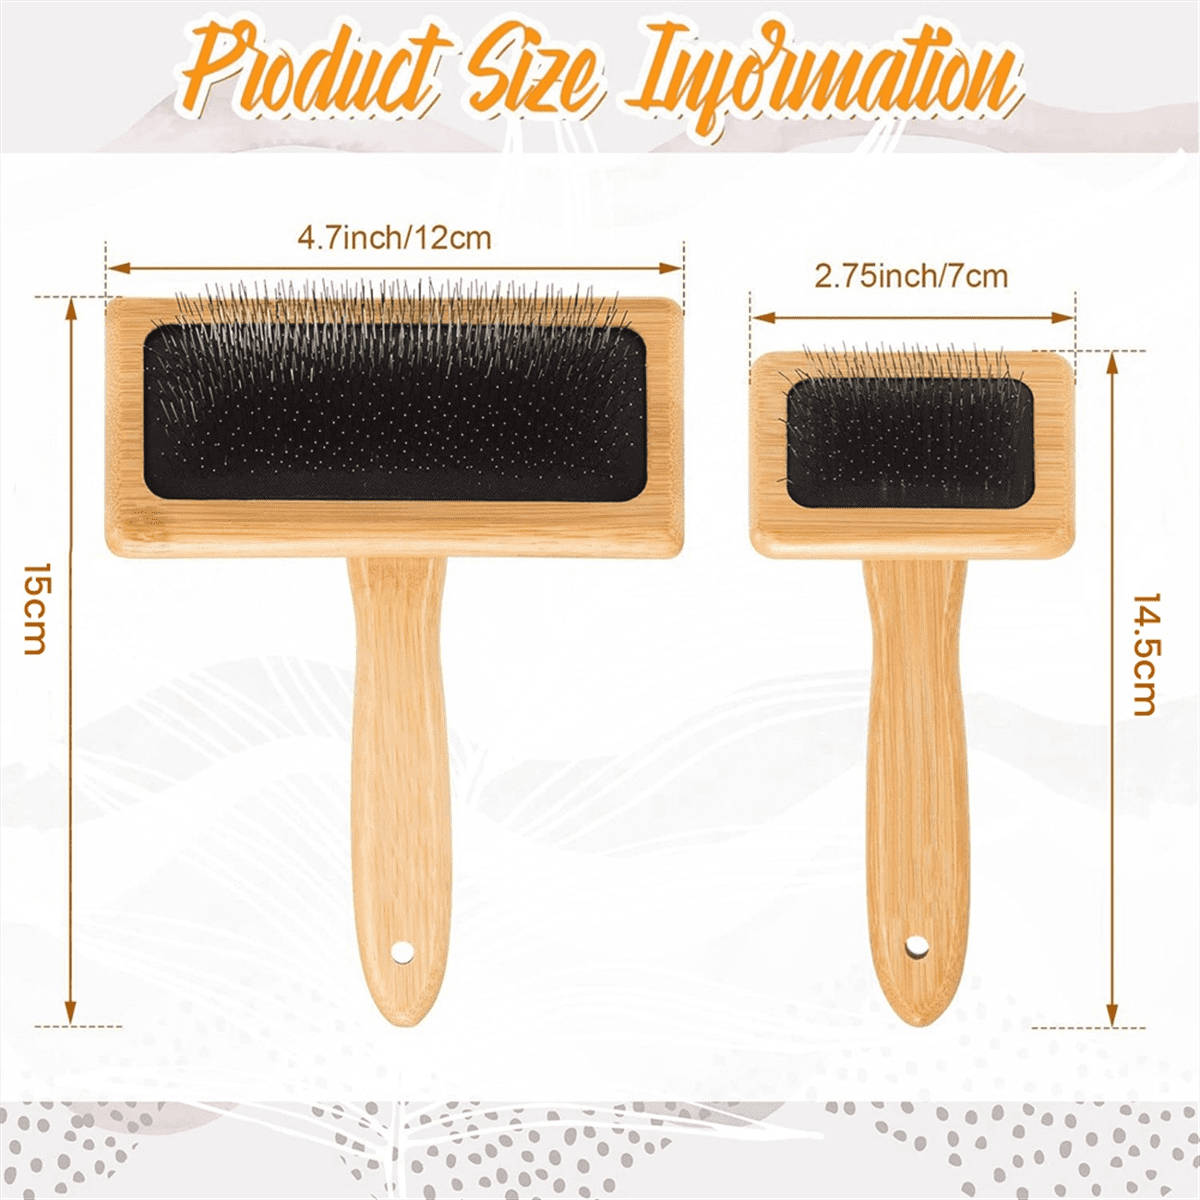 Wool Carder 2pcs, Hand Carder For Wool, Carding Combs, Carding Brush,  Blending Board Carder, Wool Comb, Wool Brush, Pet Grooming Tool, Fiber